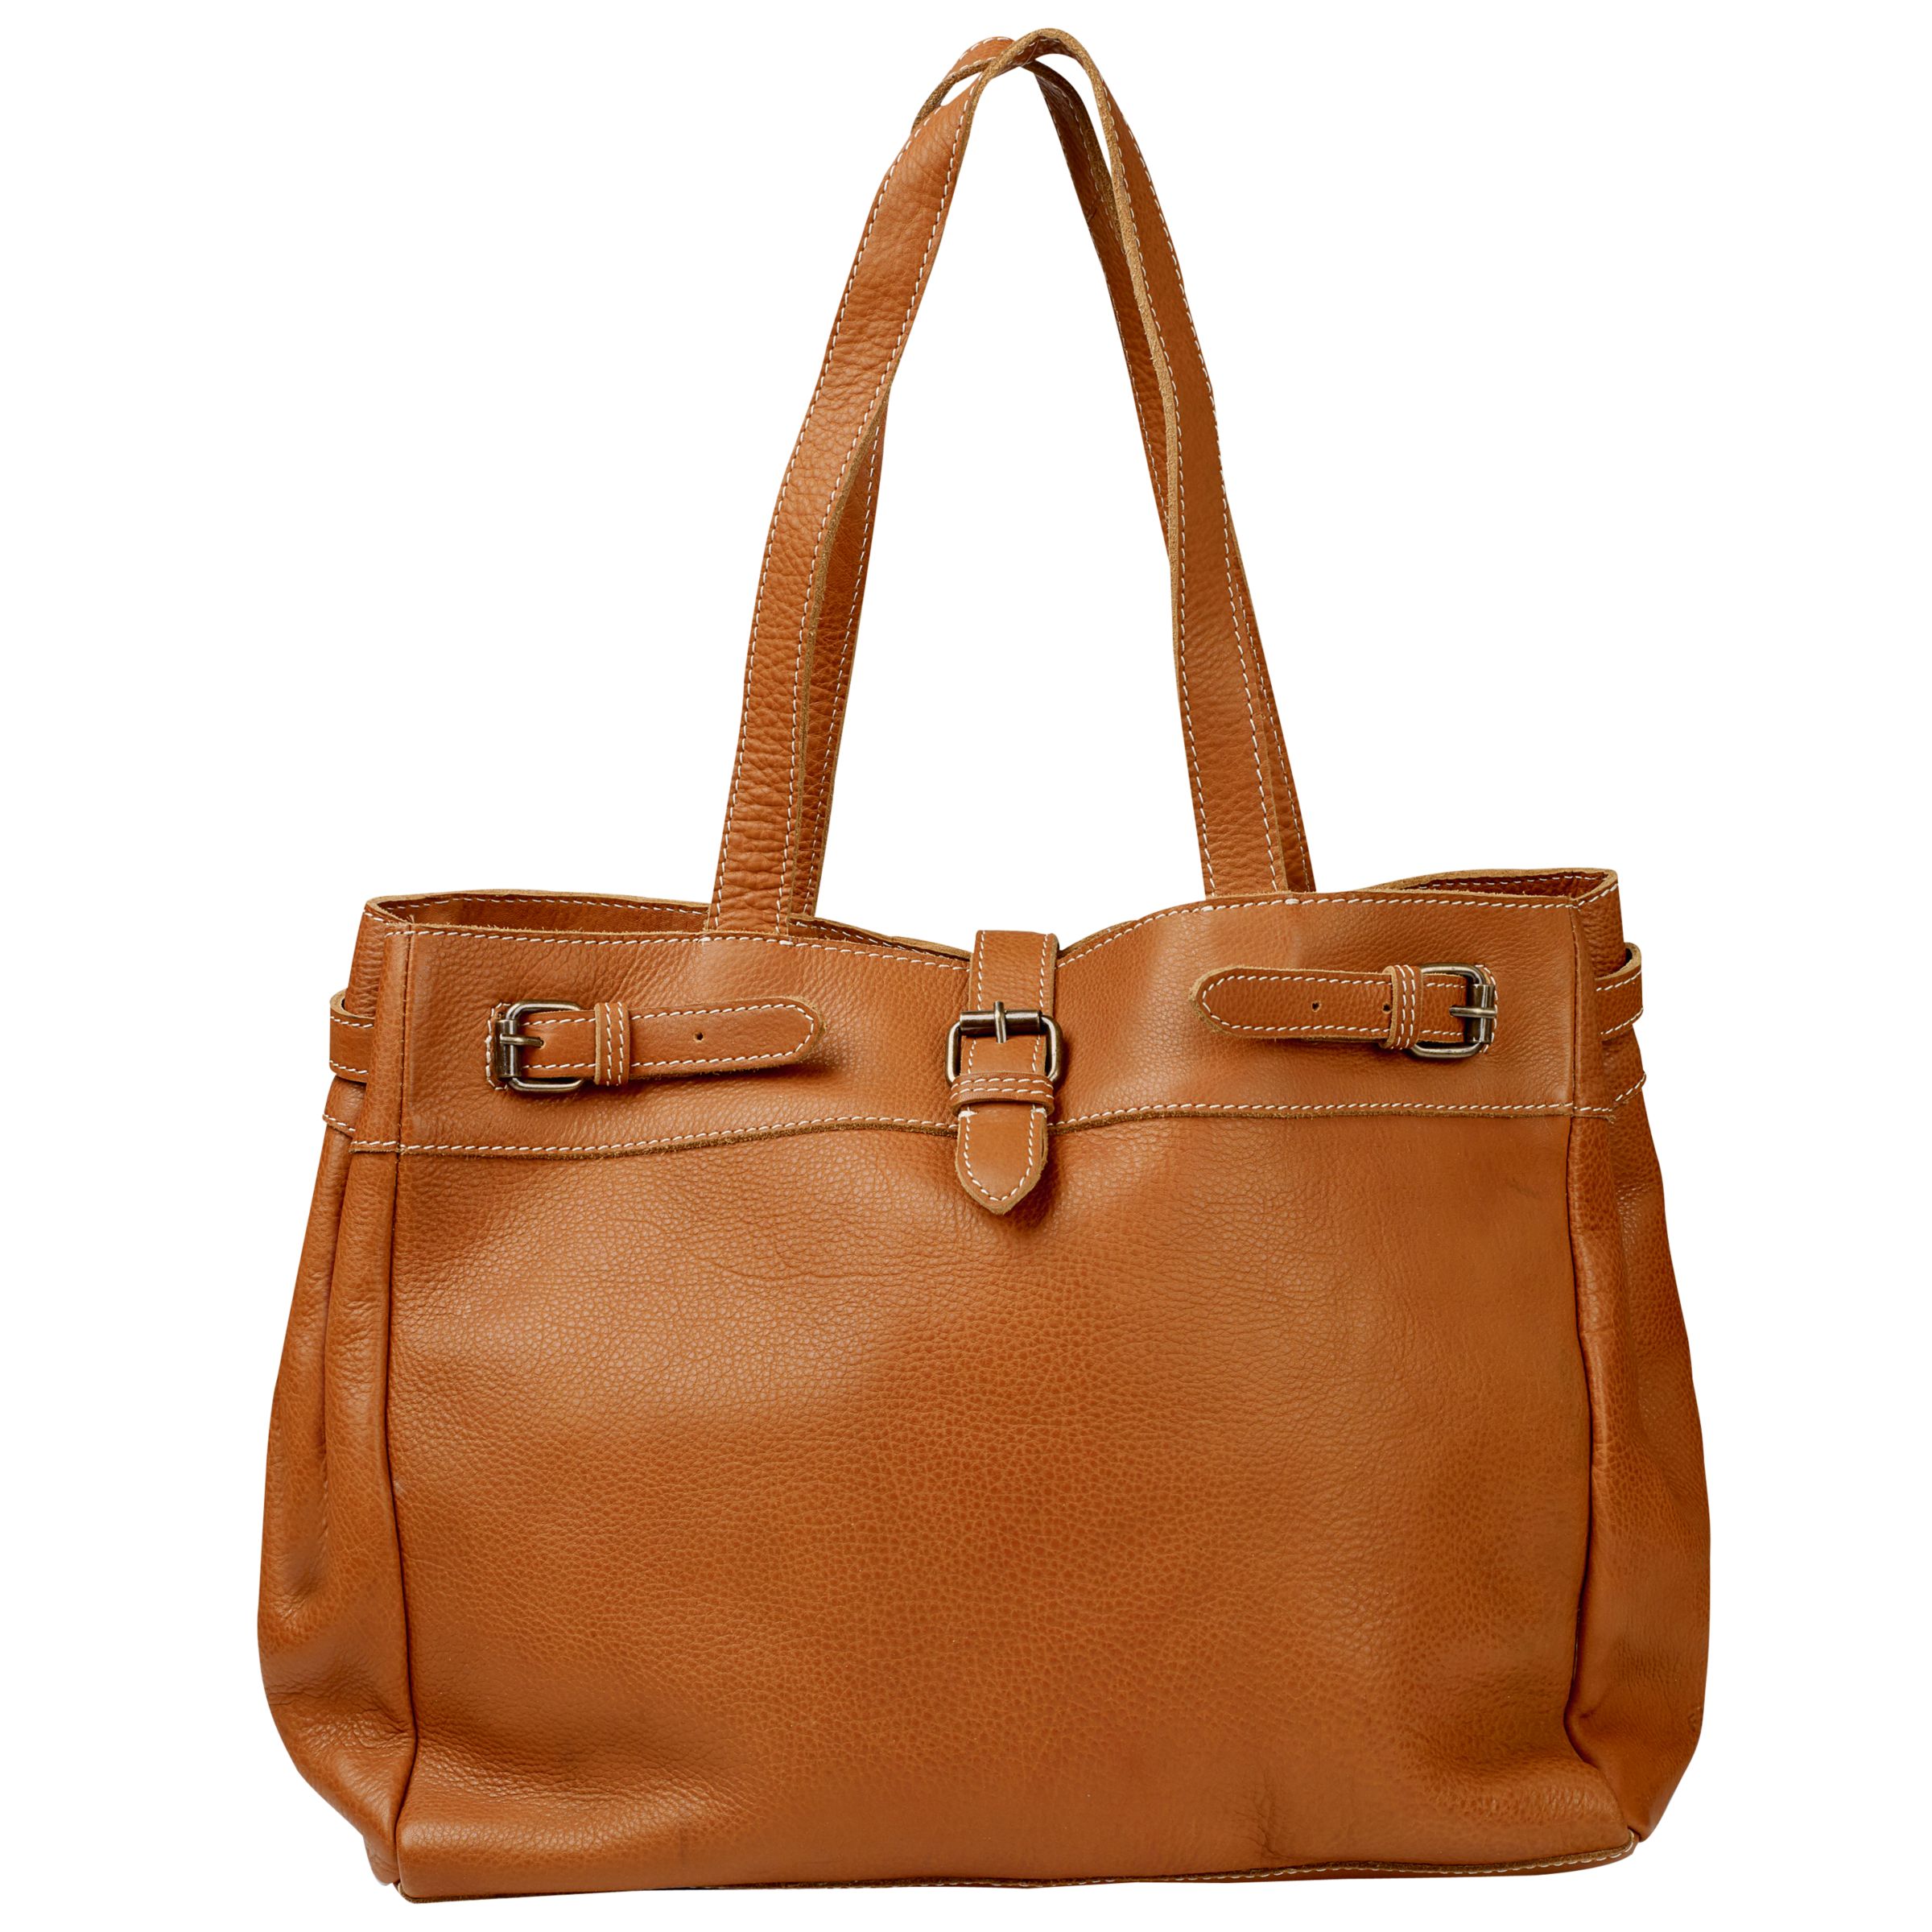 Fat Face Three Buckle Leather Tote Bag, Tan